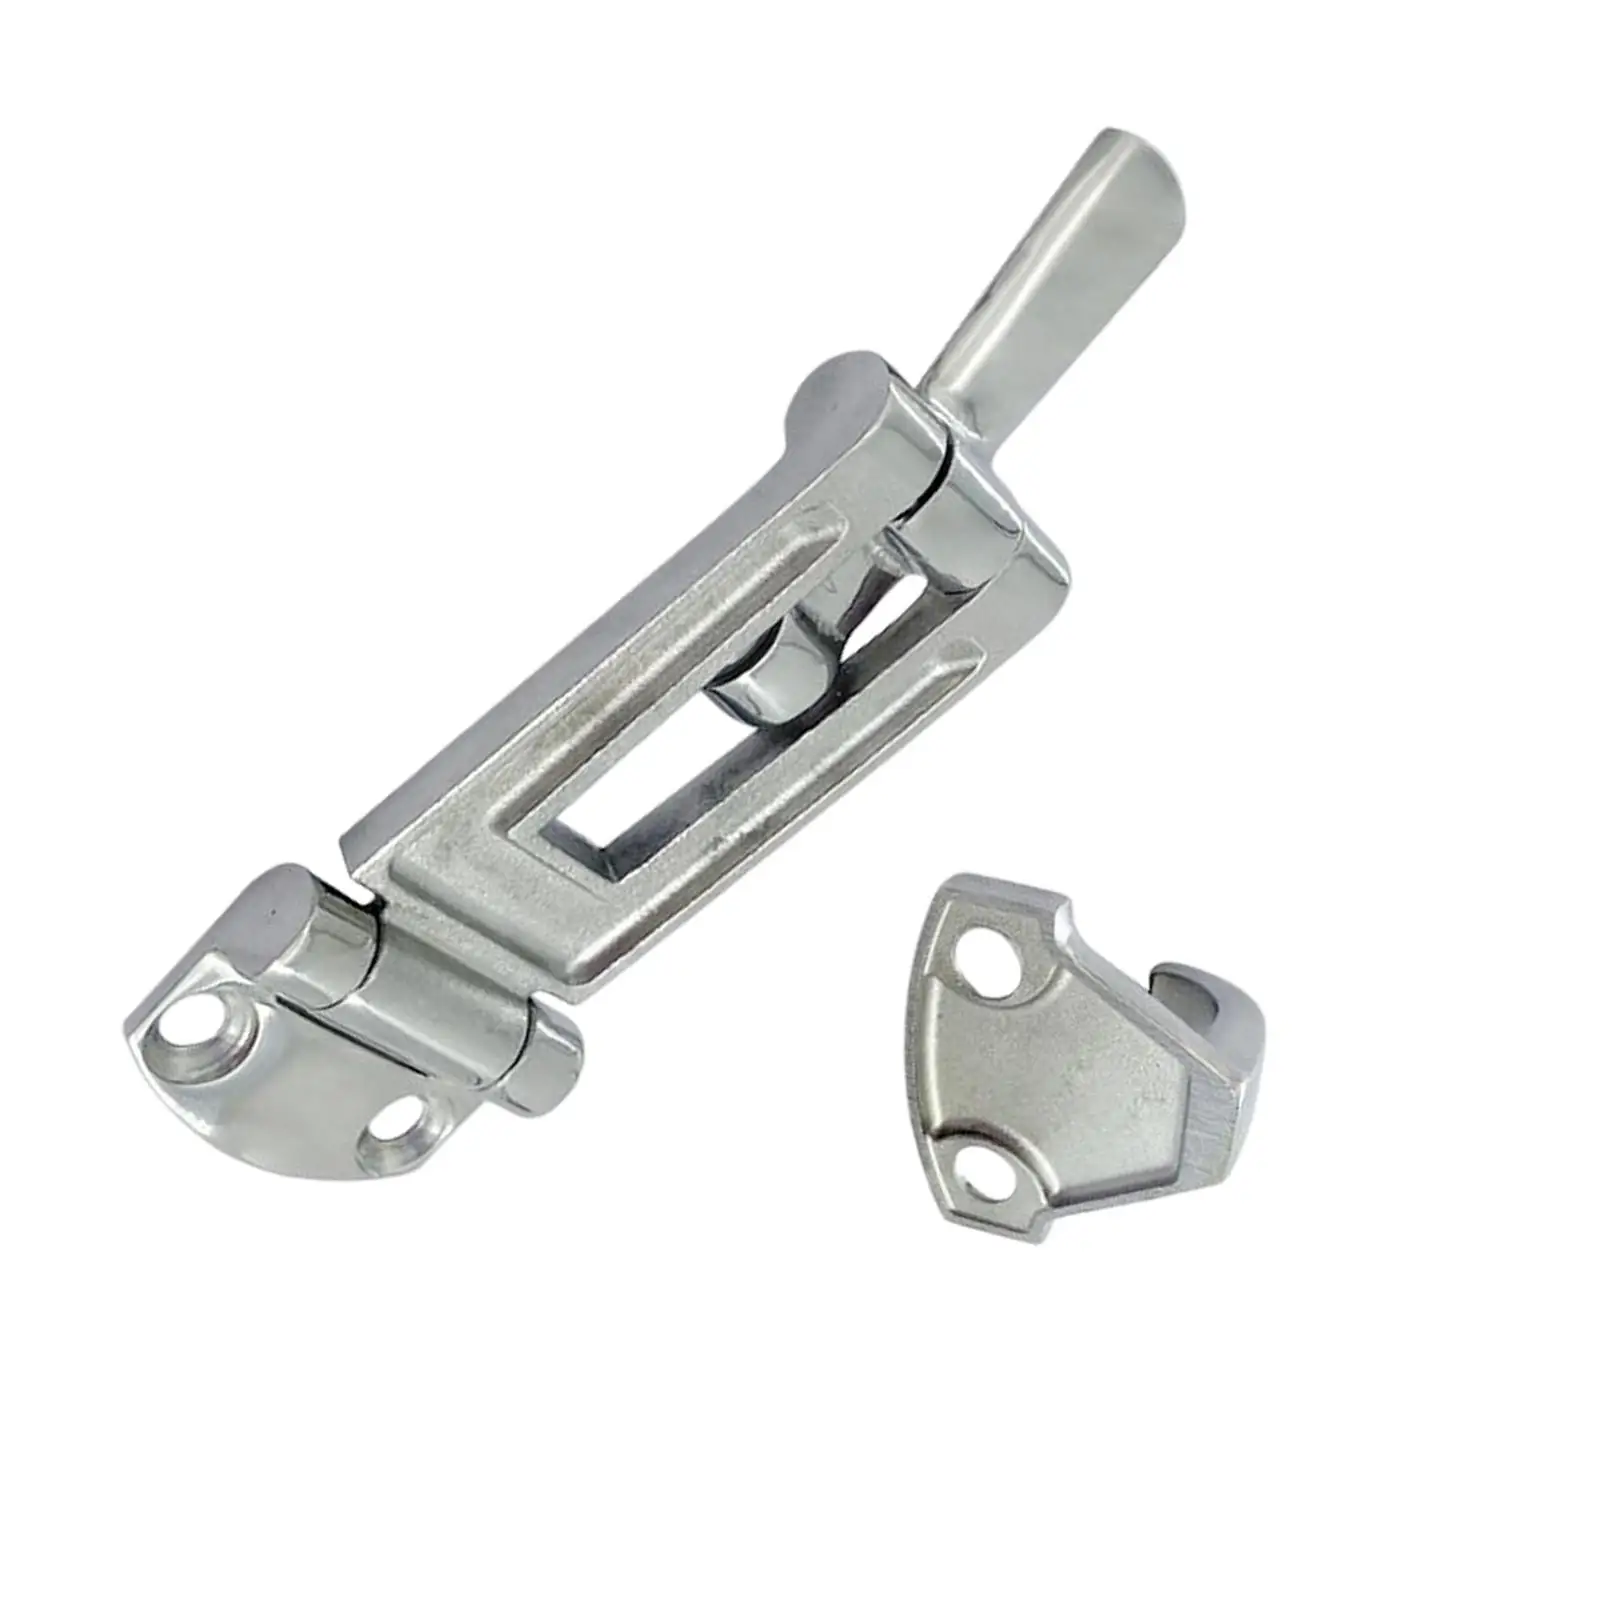 Cabinet Door Latch Silver 316 Stainless Steel Anti Rattle Latch for Yacht Boat